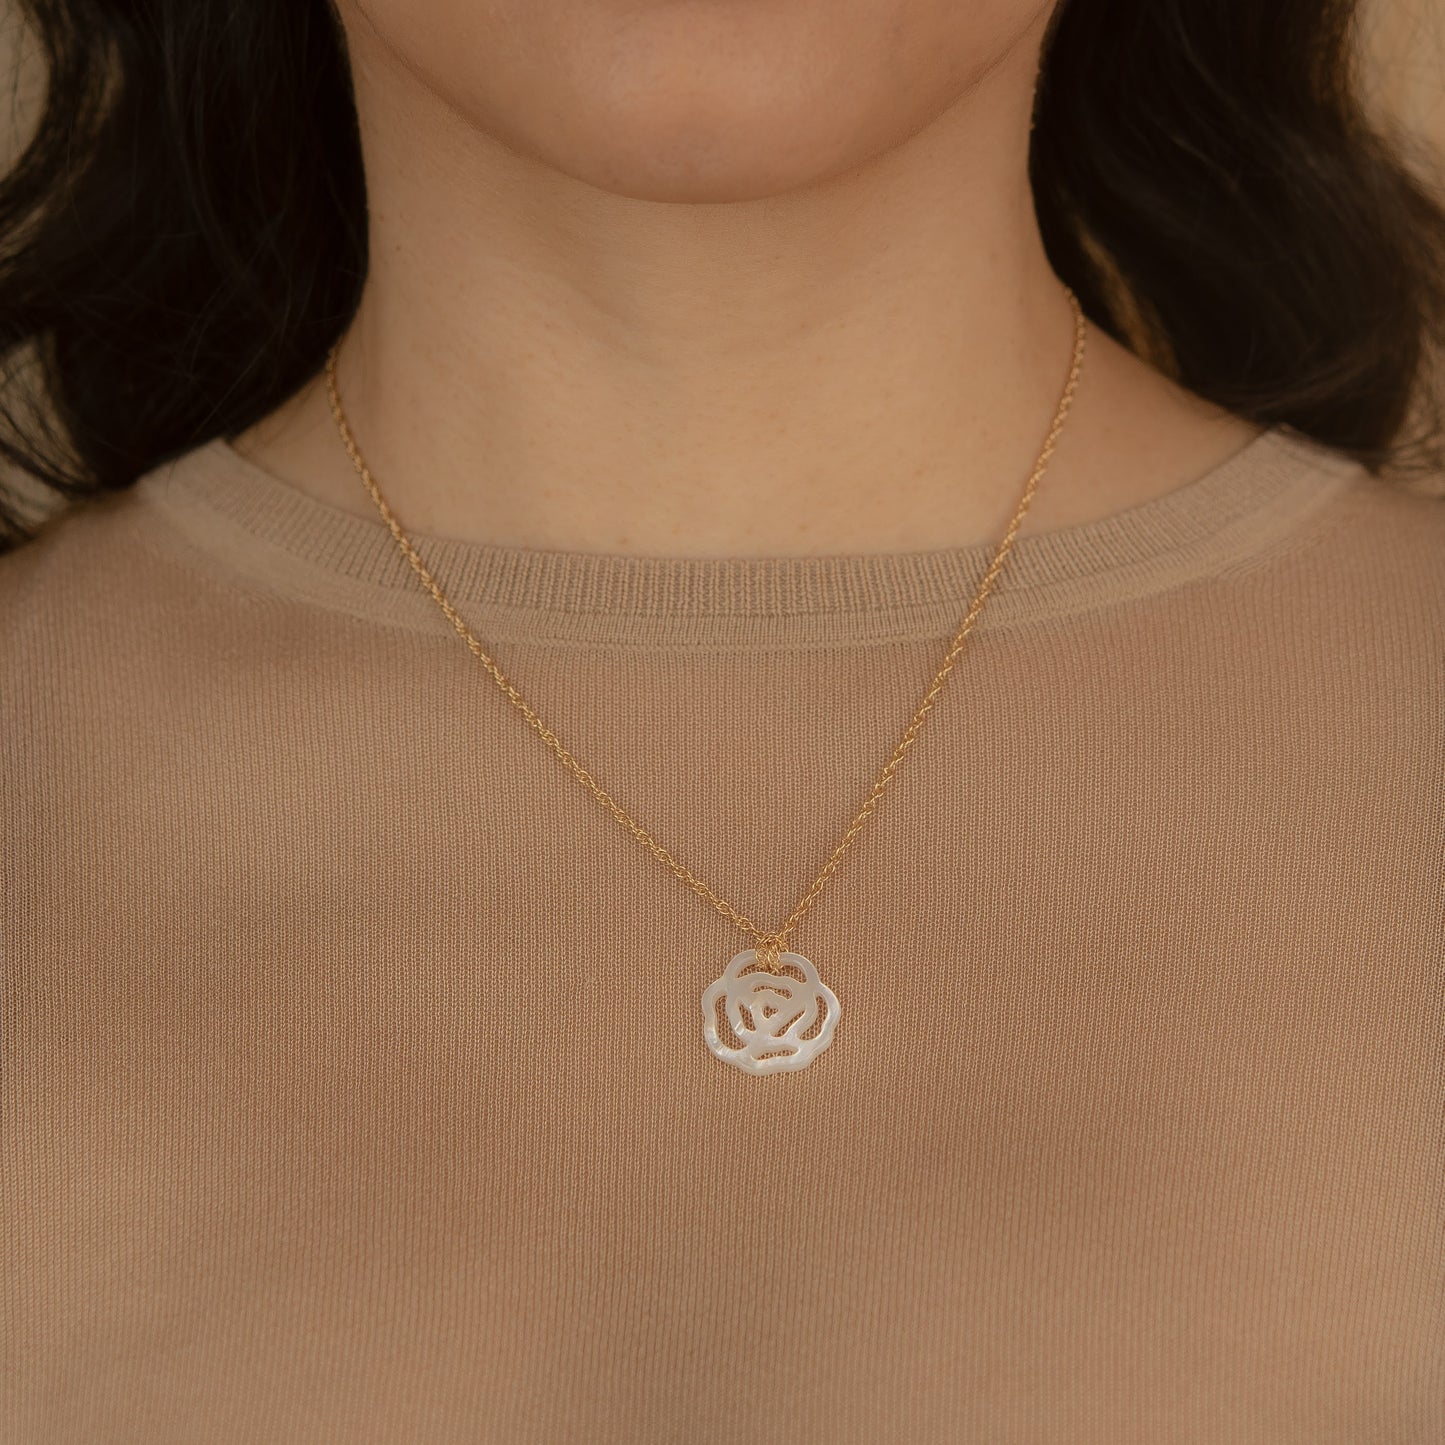 The Bloom Necklace